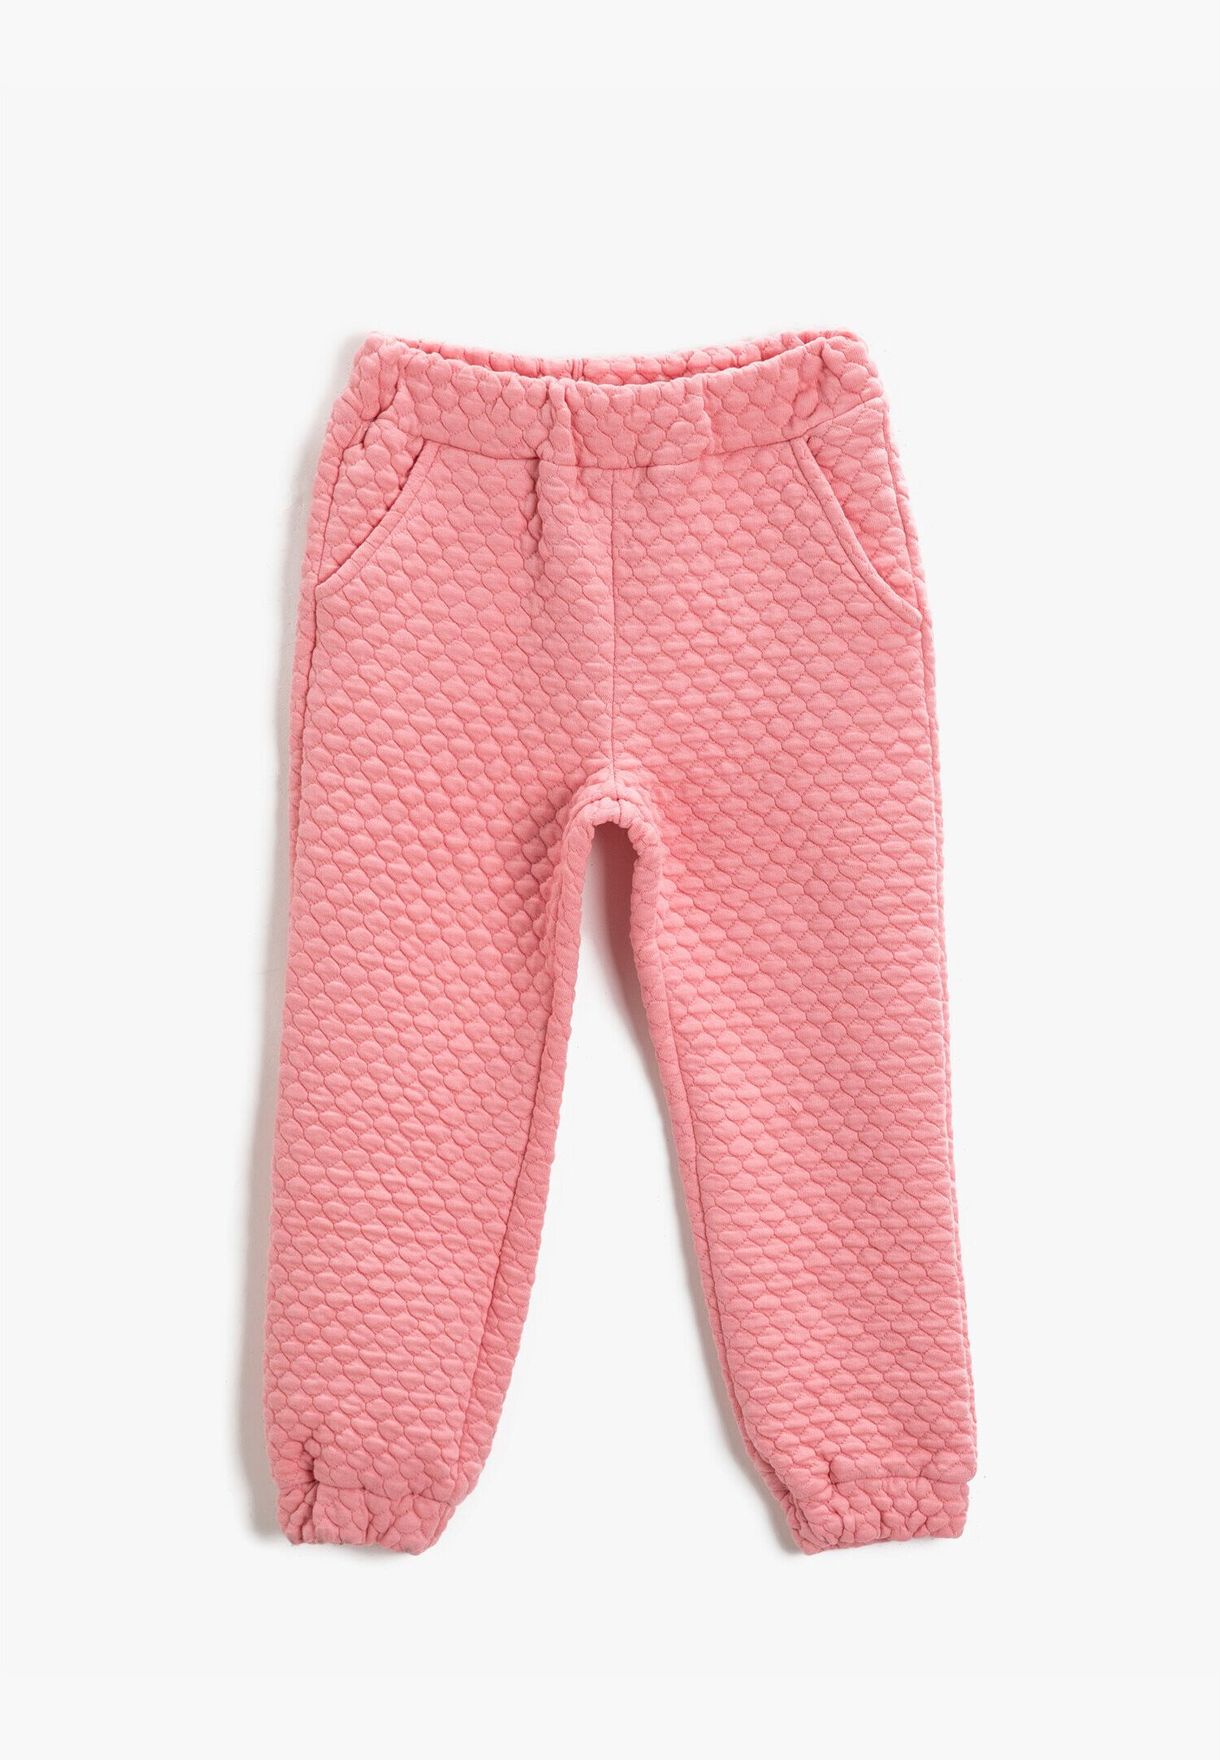 Quilted Sweatpants Jogger Pocket